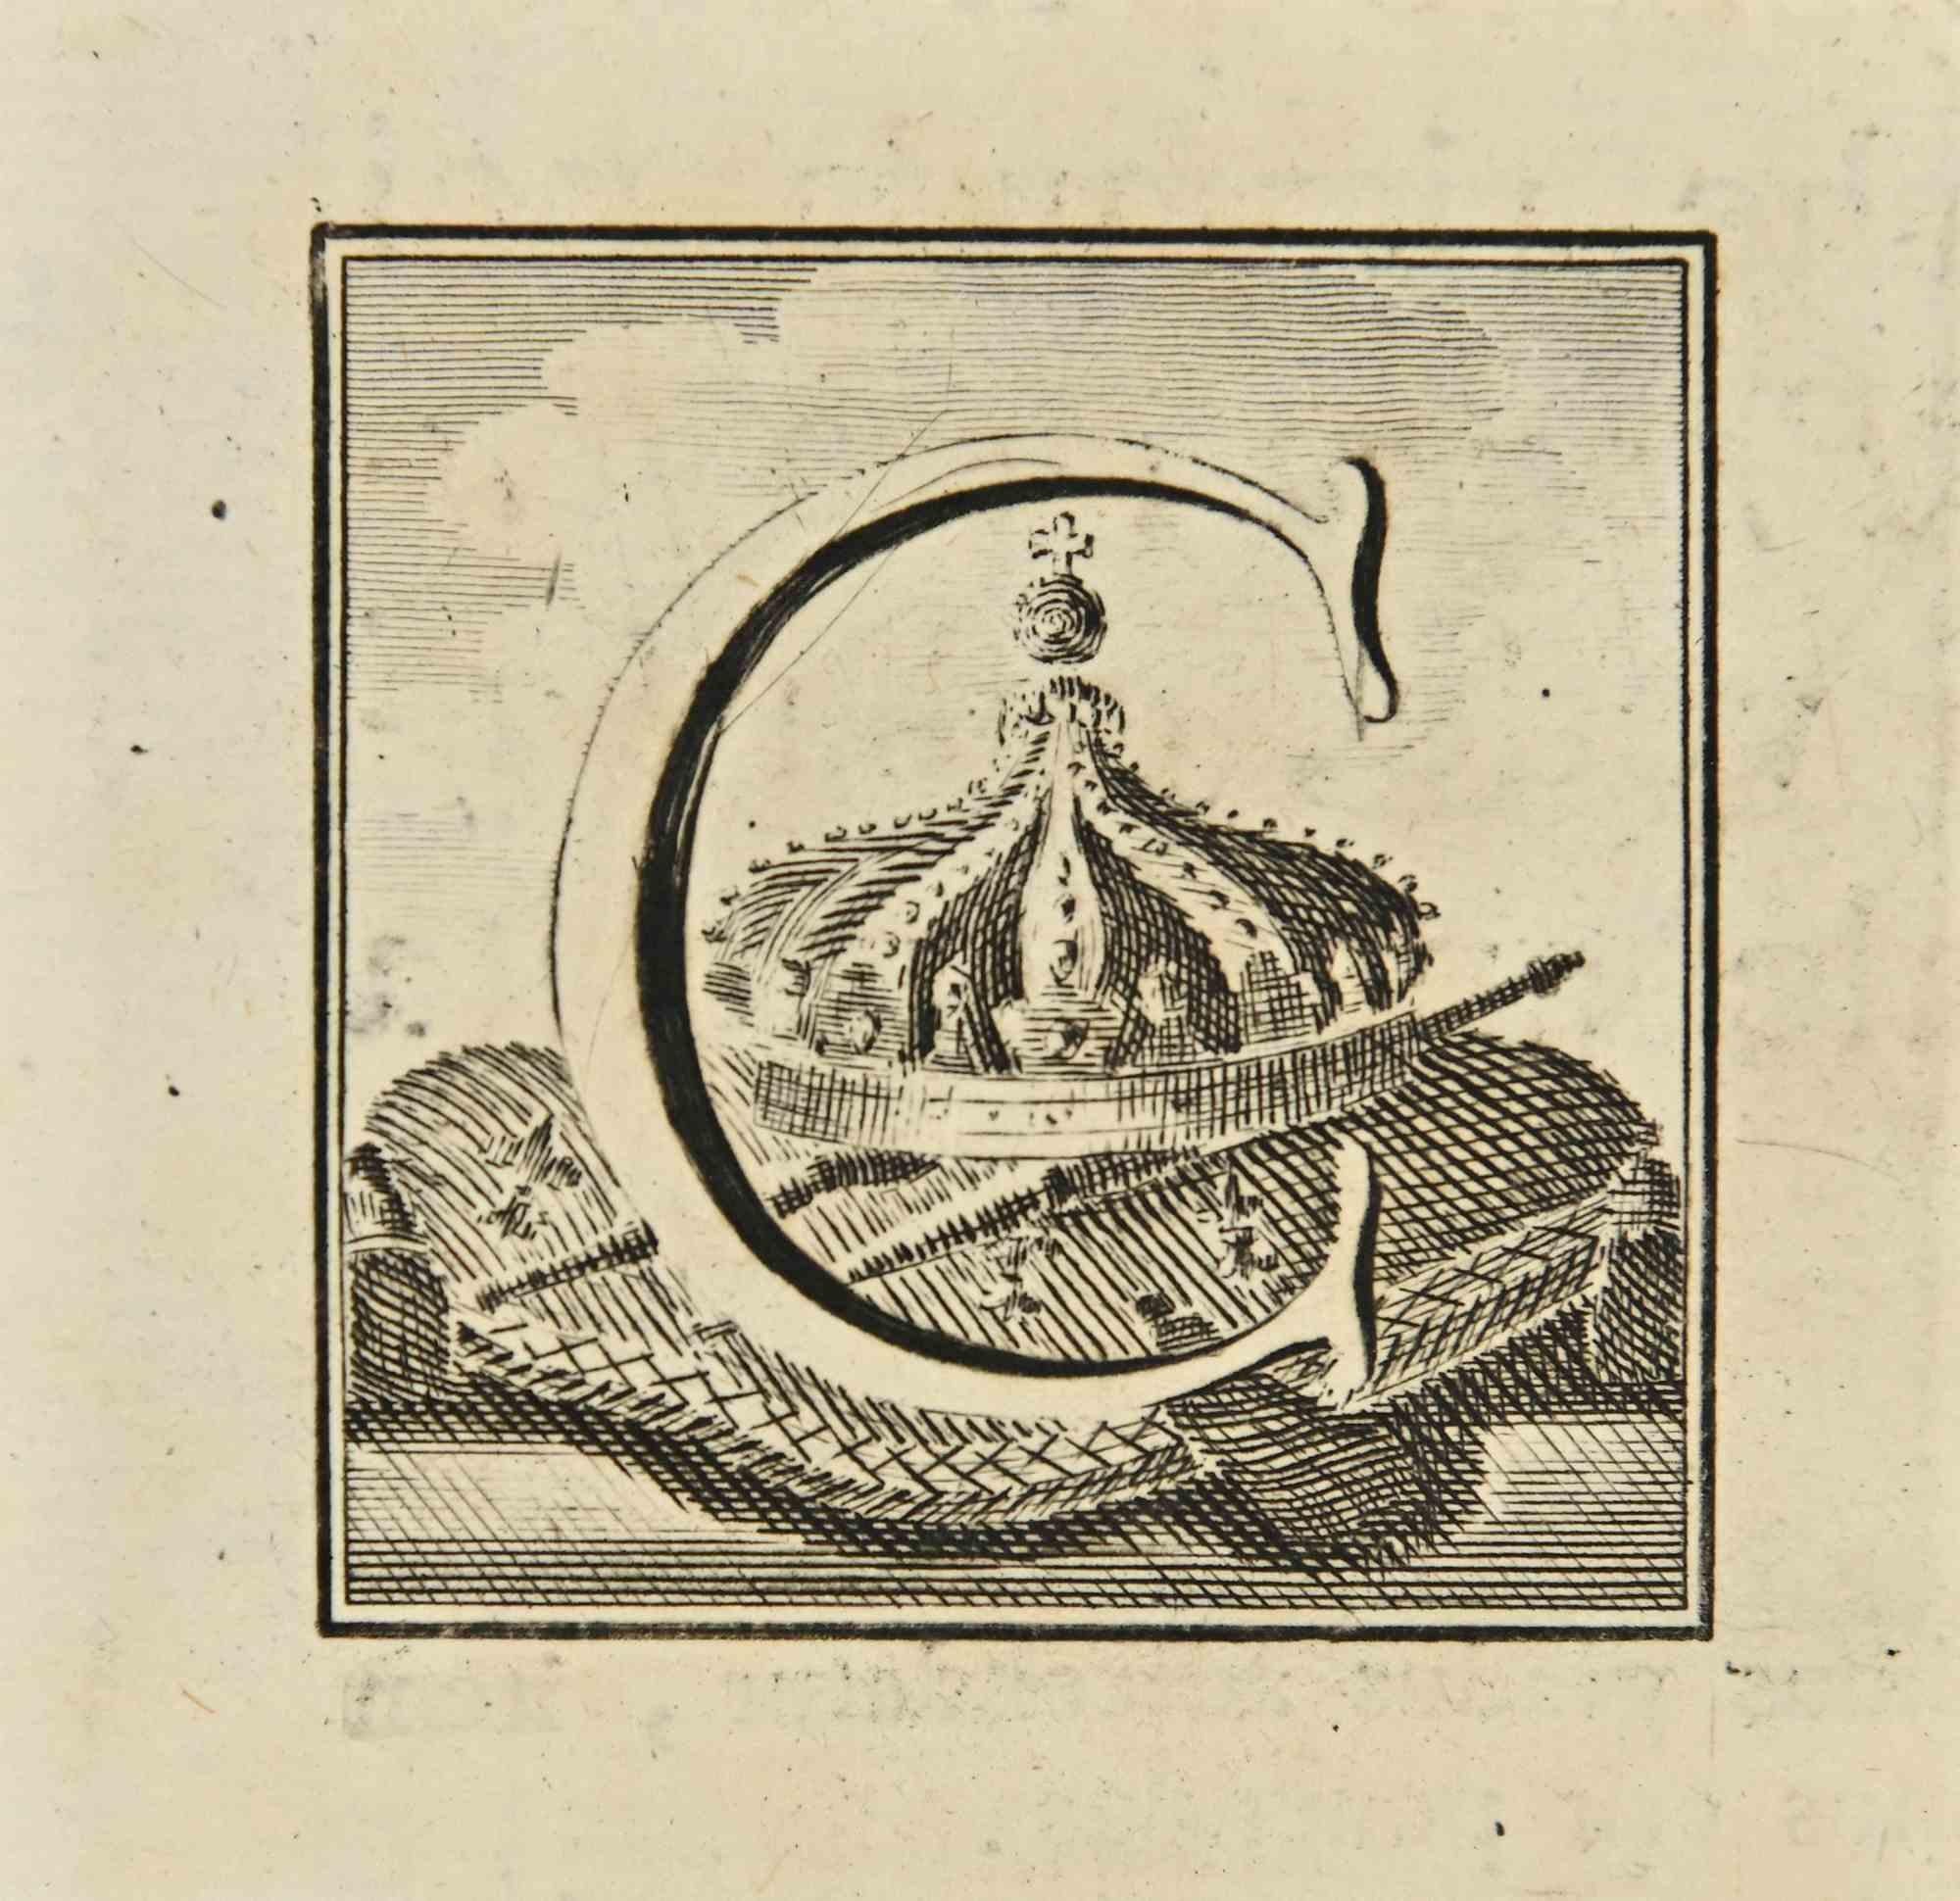 Letter of the Alphabet C,  from the series "Antiquities of Herculaneum", is an etching on paper realized by Luigi Vanvitelli in the 18th century.

Good conditions.

The etching belongs to the print suite “Antiquities of Herculaneum Exposed”